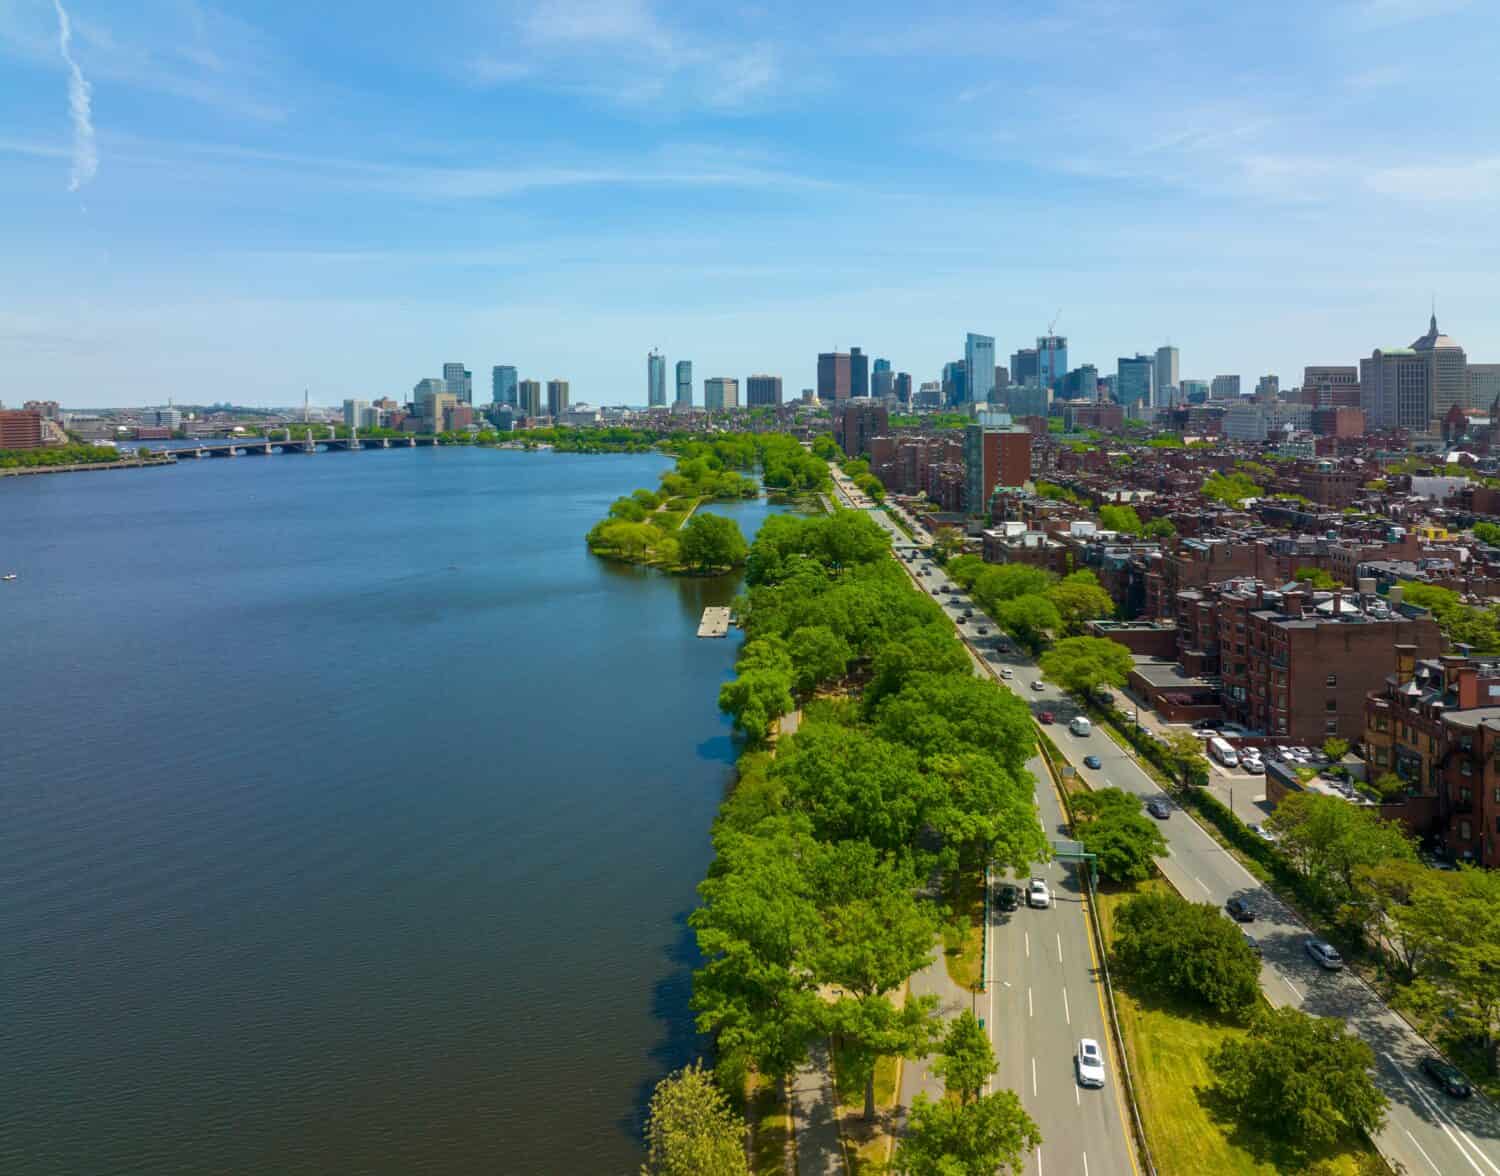 Boston financial district modern city skyline aerial view with Charles River, Beacon Hill historic district and Charles River Esplanade in Boston, Massachusetts MA, USA.